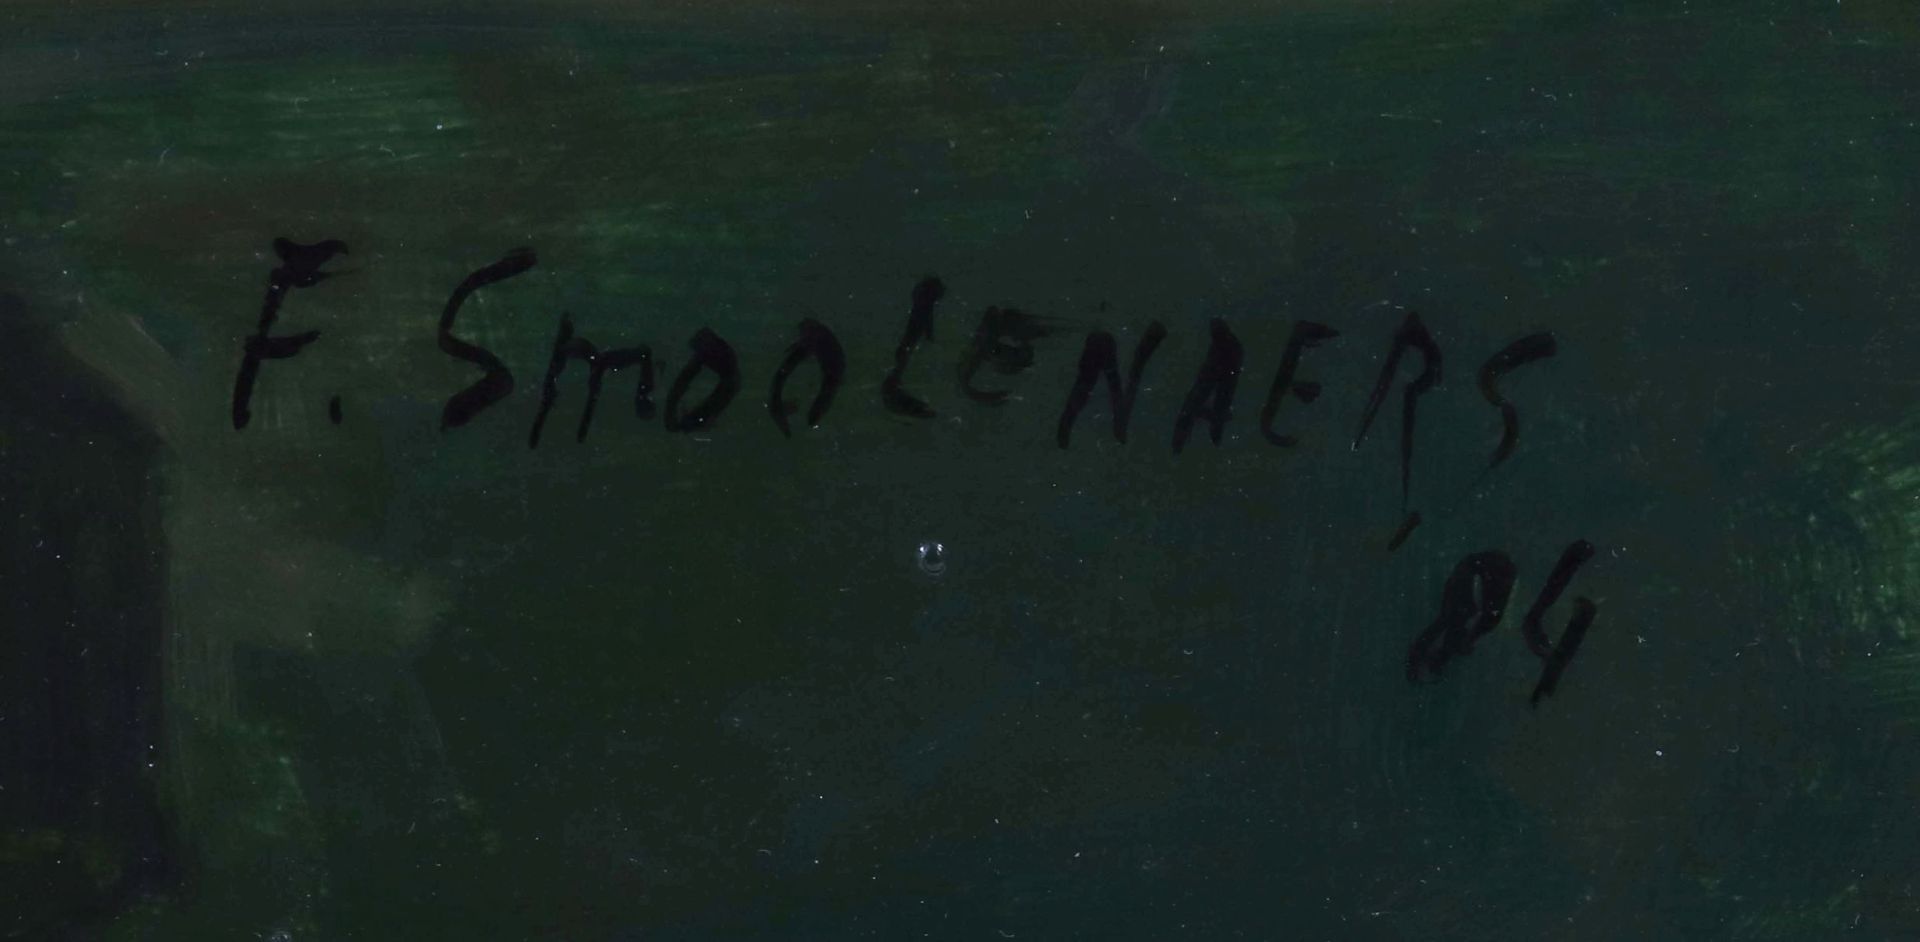 Smoolnaers, Fred geb. 1951, - Image 3 of 4